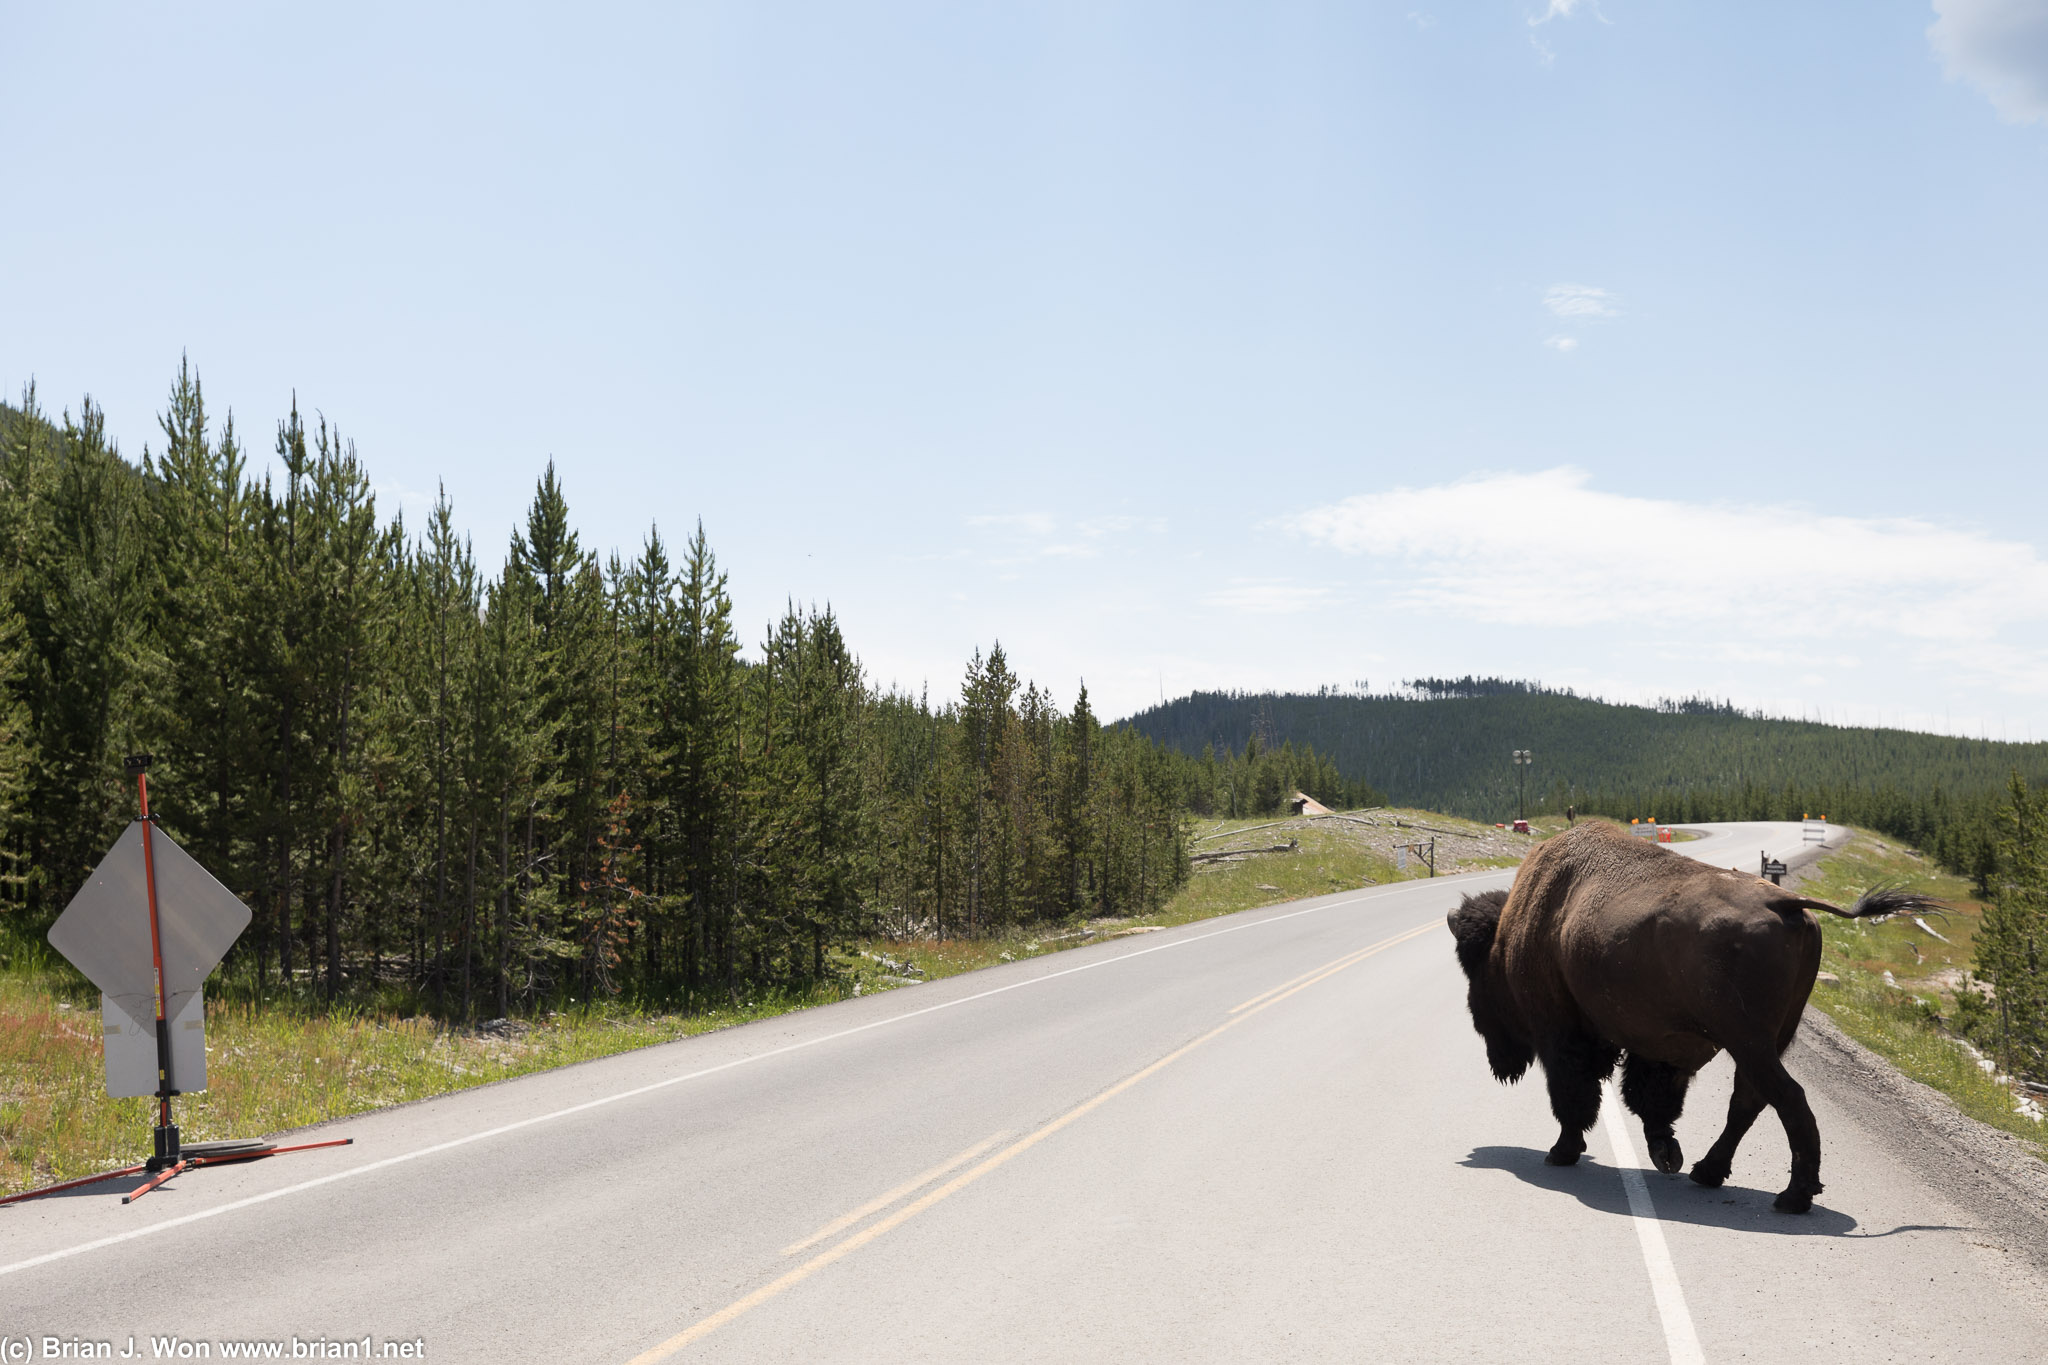 Why did the bison cross the road?